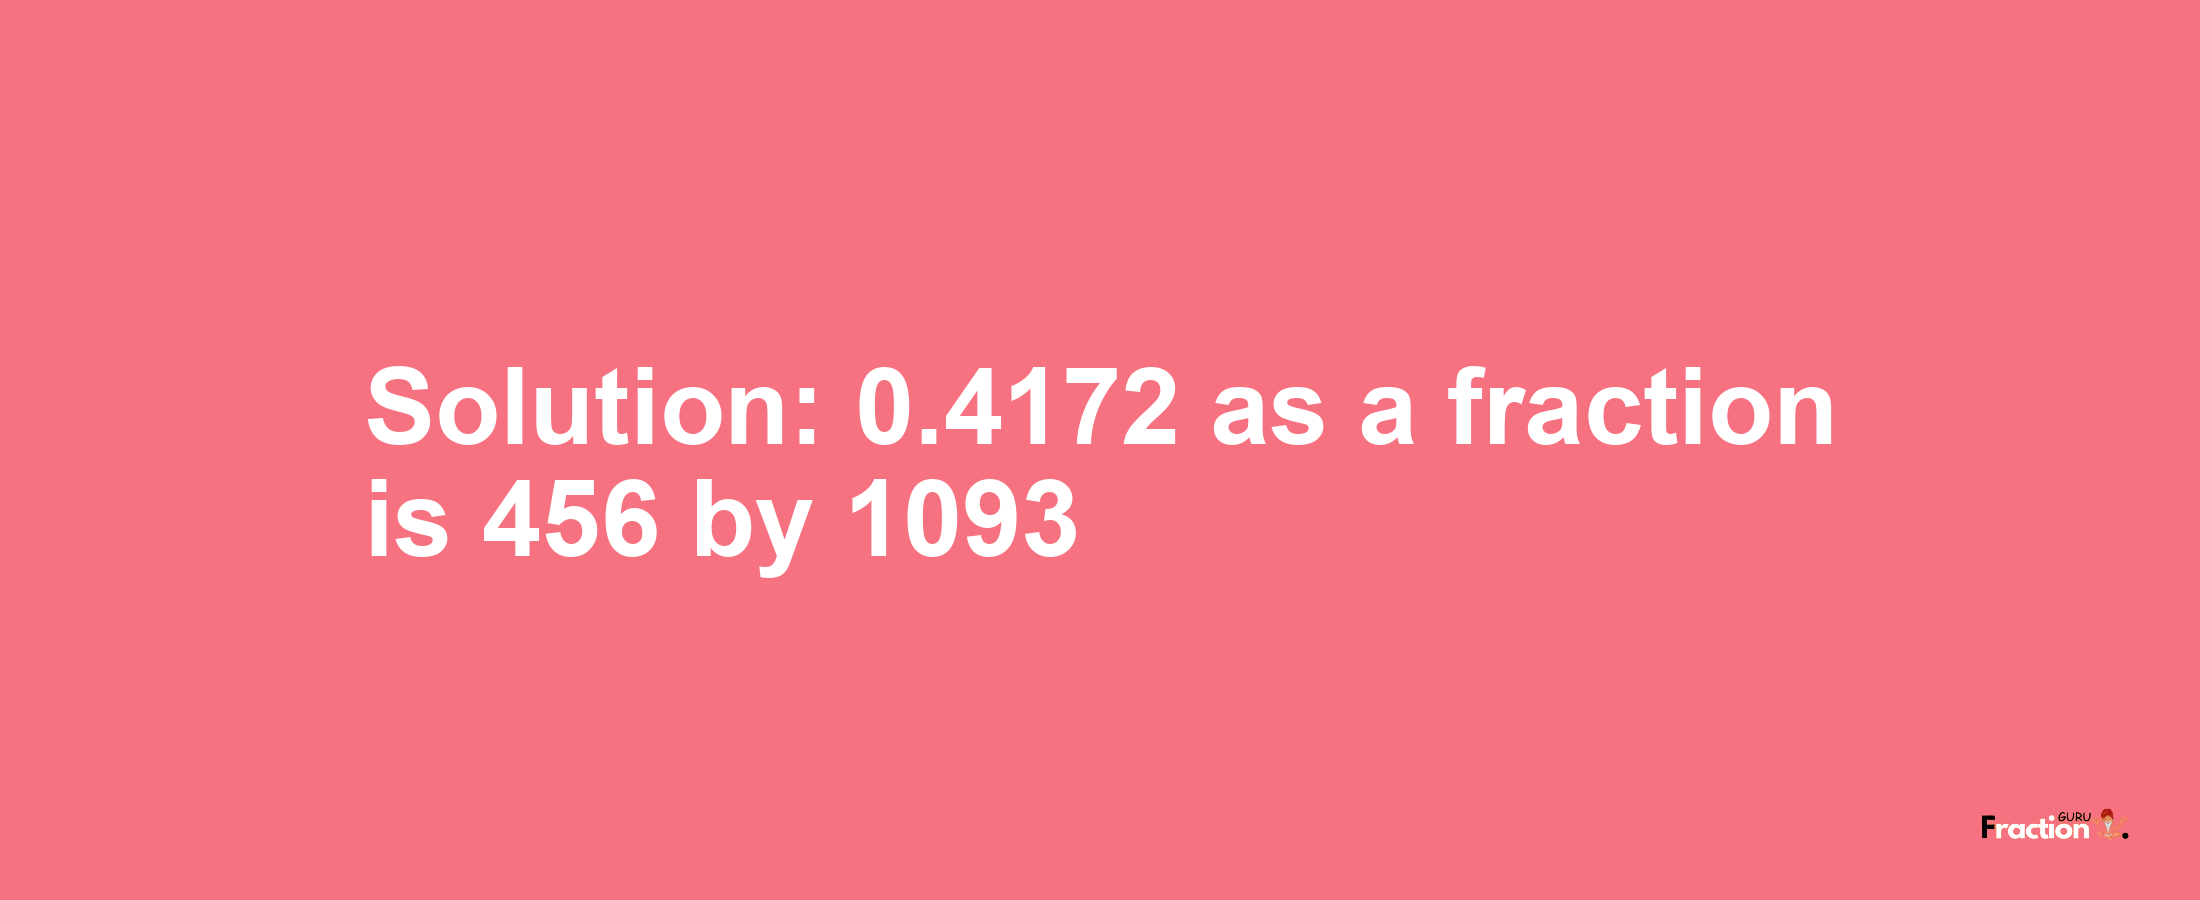 Solution:0.4172 as a fraction is 456/1093